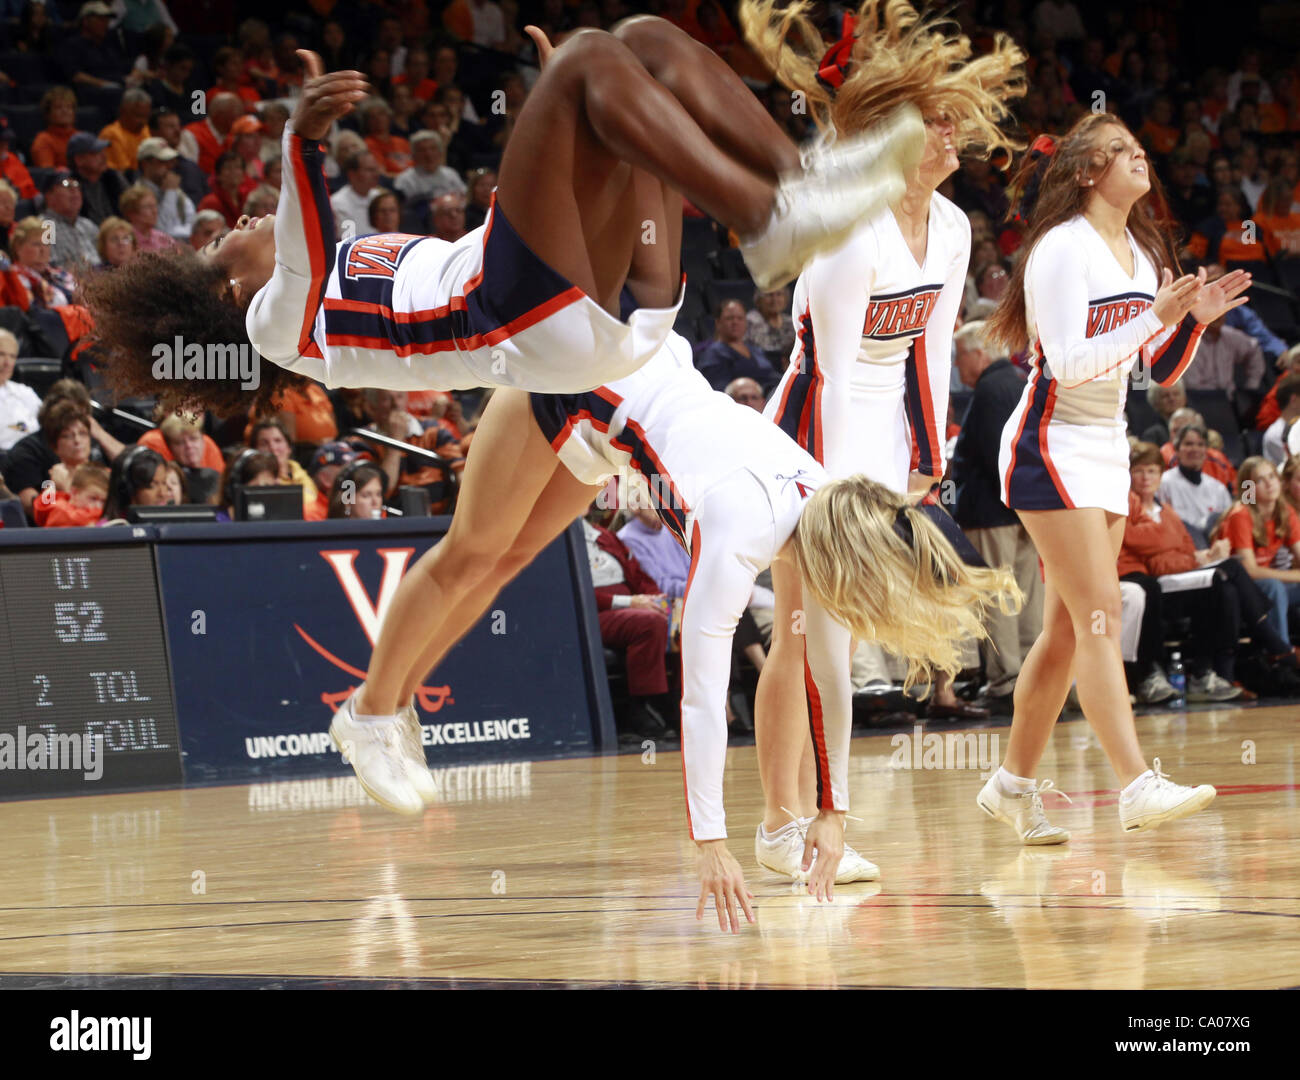 Nov. 20, 2011 - Charlottesville, Virginia, United States - Virginia Cavaliers cheerleaders perform during the game on November 20, 2011 against the Tennessee Lady Volunteers at the John Paul Jones Arena in Charlottesville, Virginia. Virginia defeated Tennessee in overtime 69-64. (Credit Image: © And Stock Photo